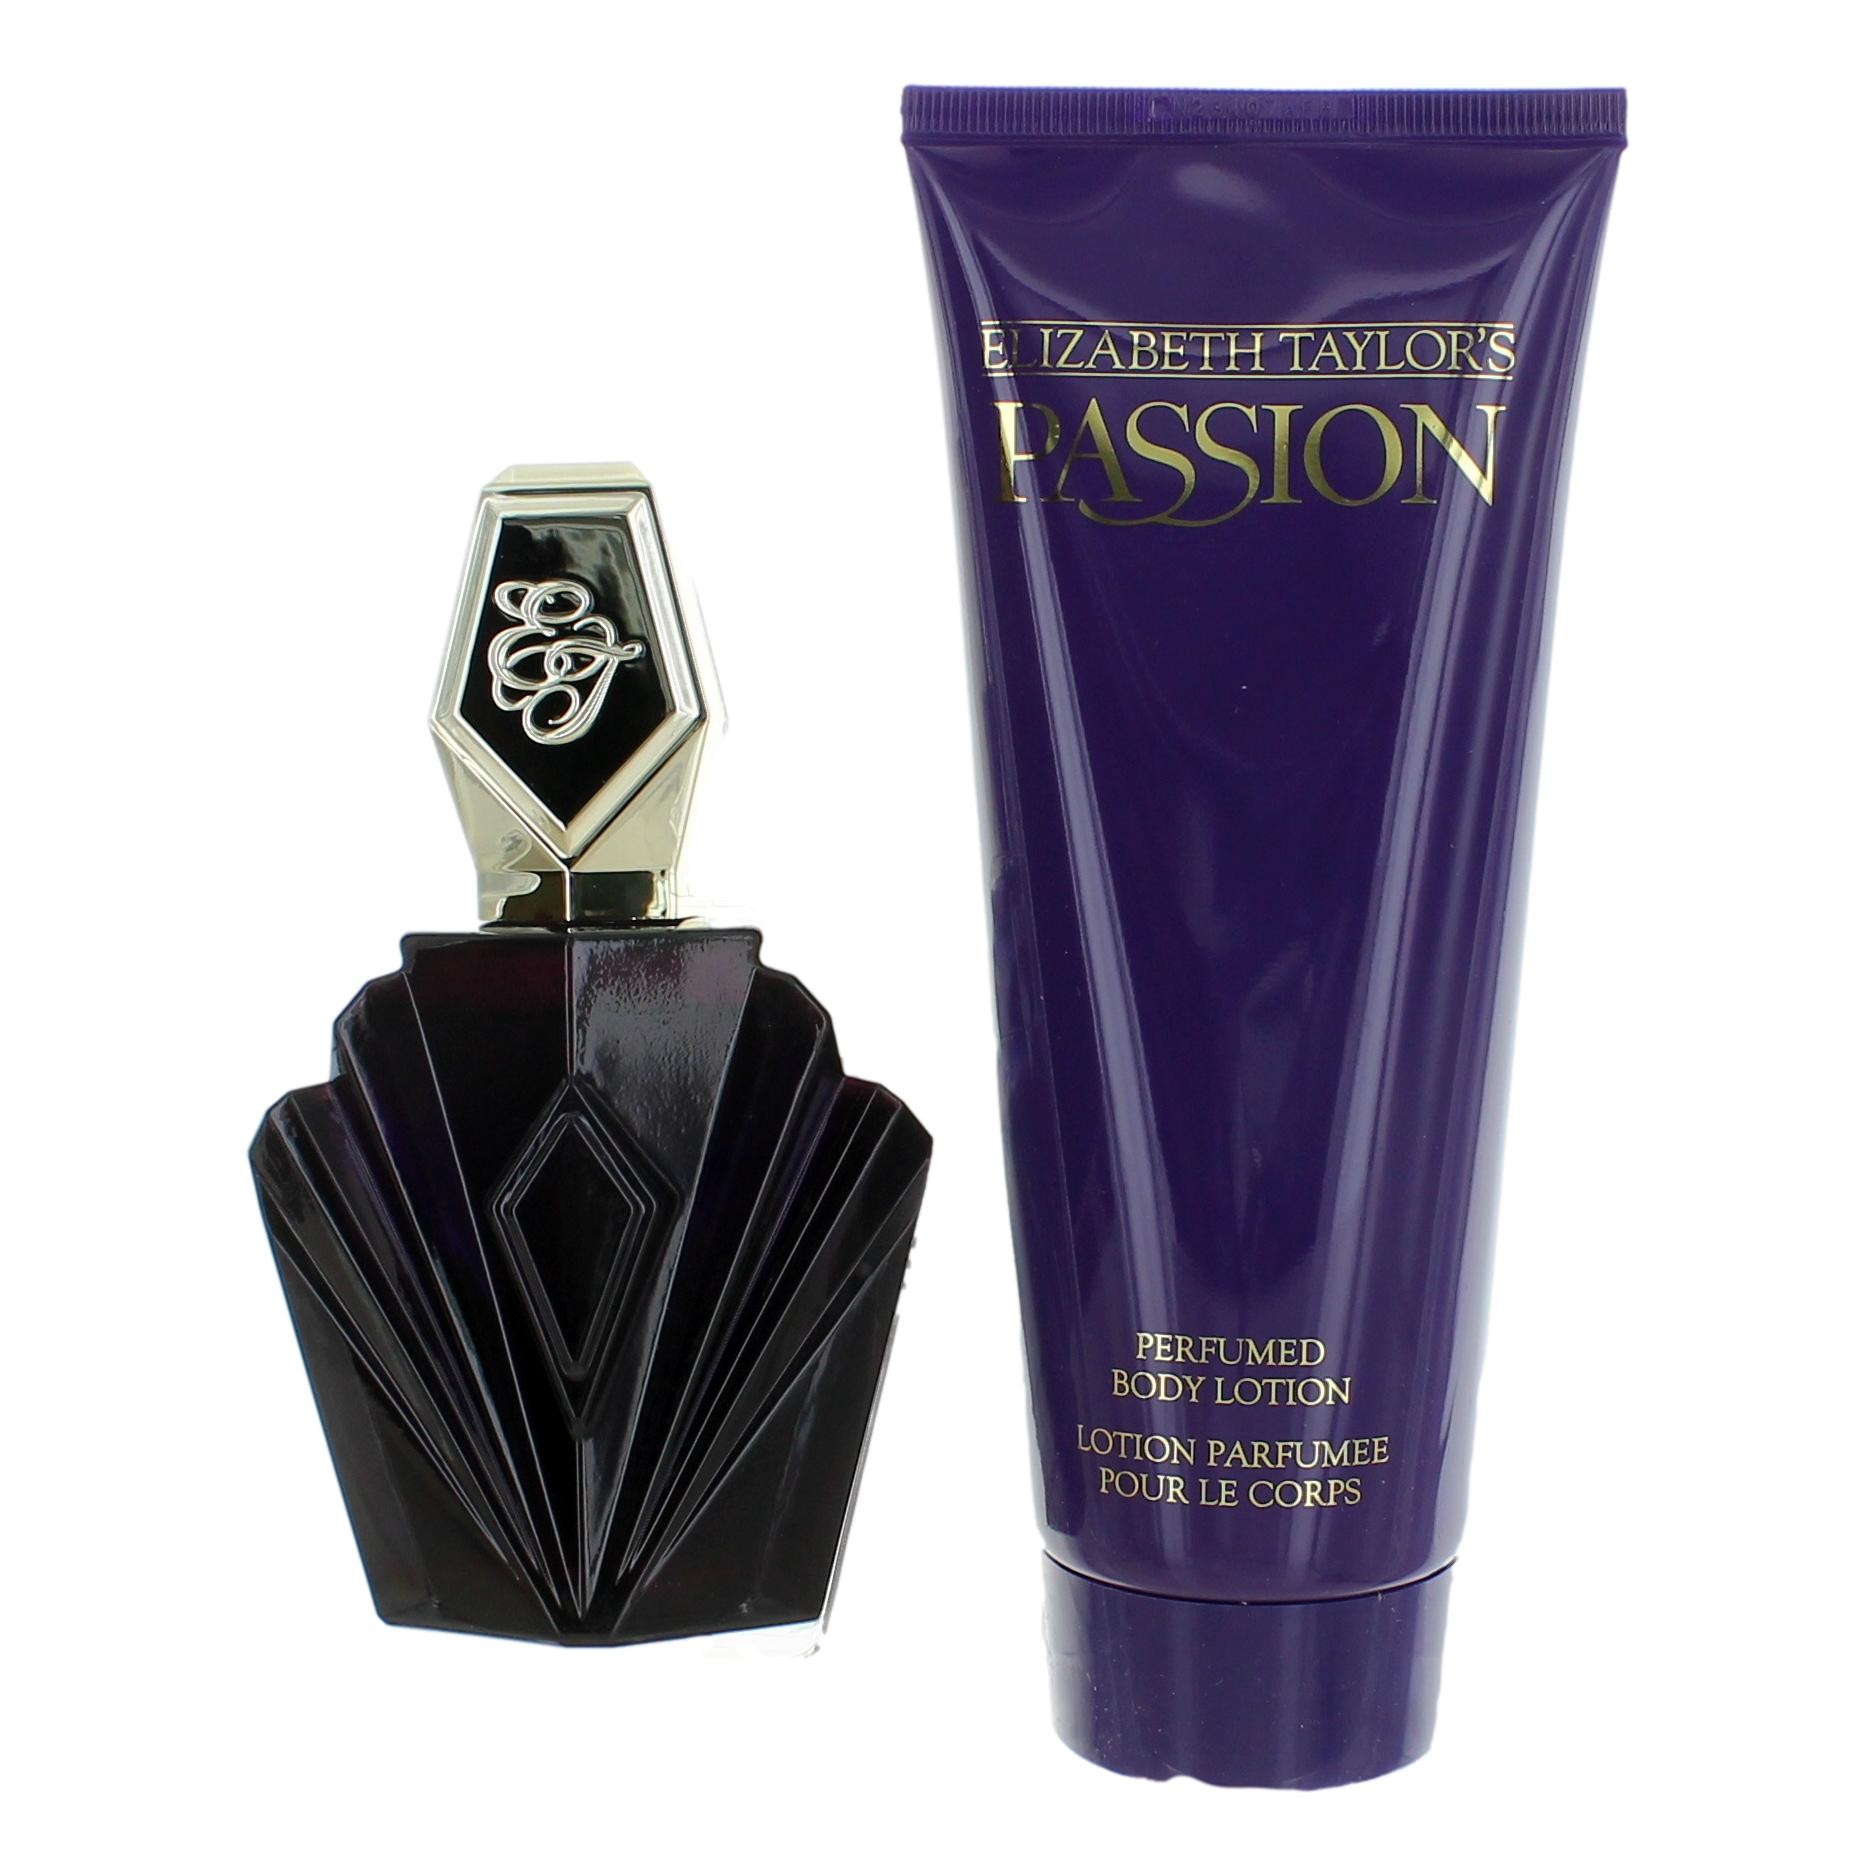 Passion by Elizabeth Taylor 2 Piece Gift Set for Women